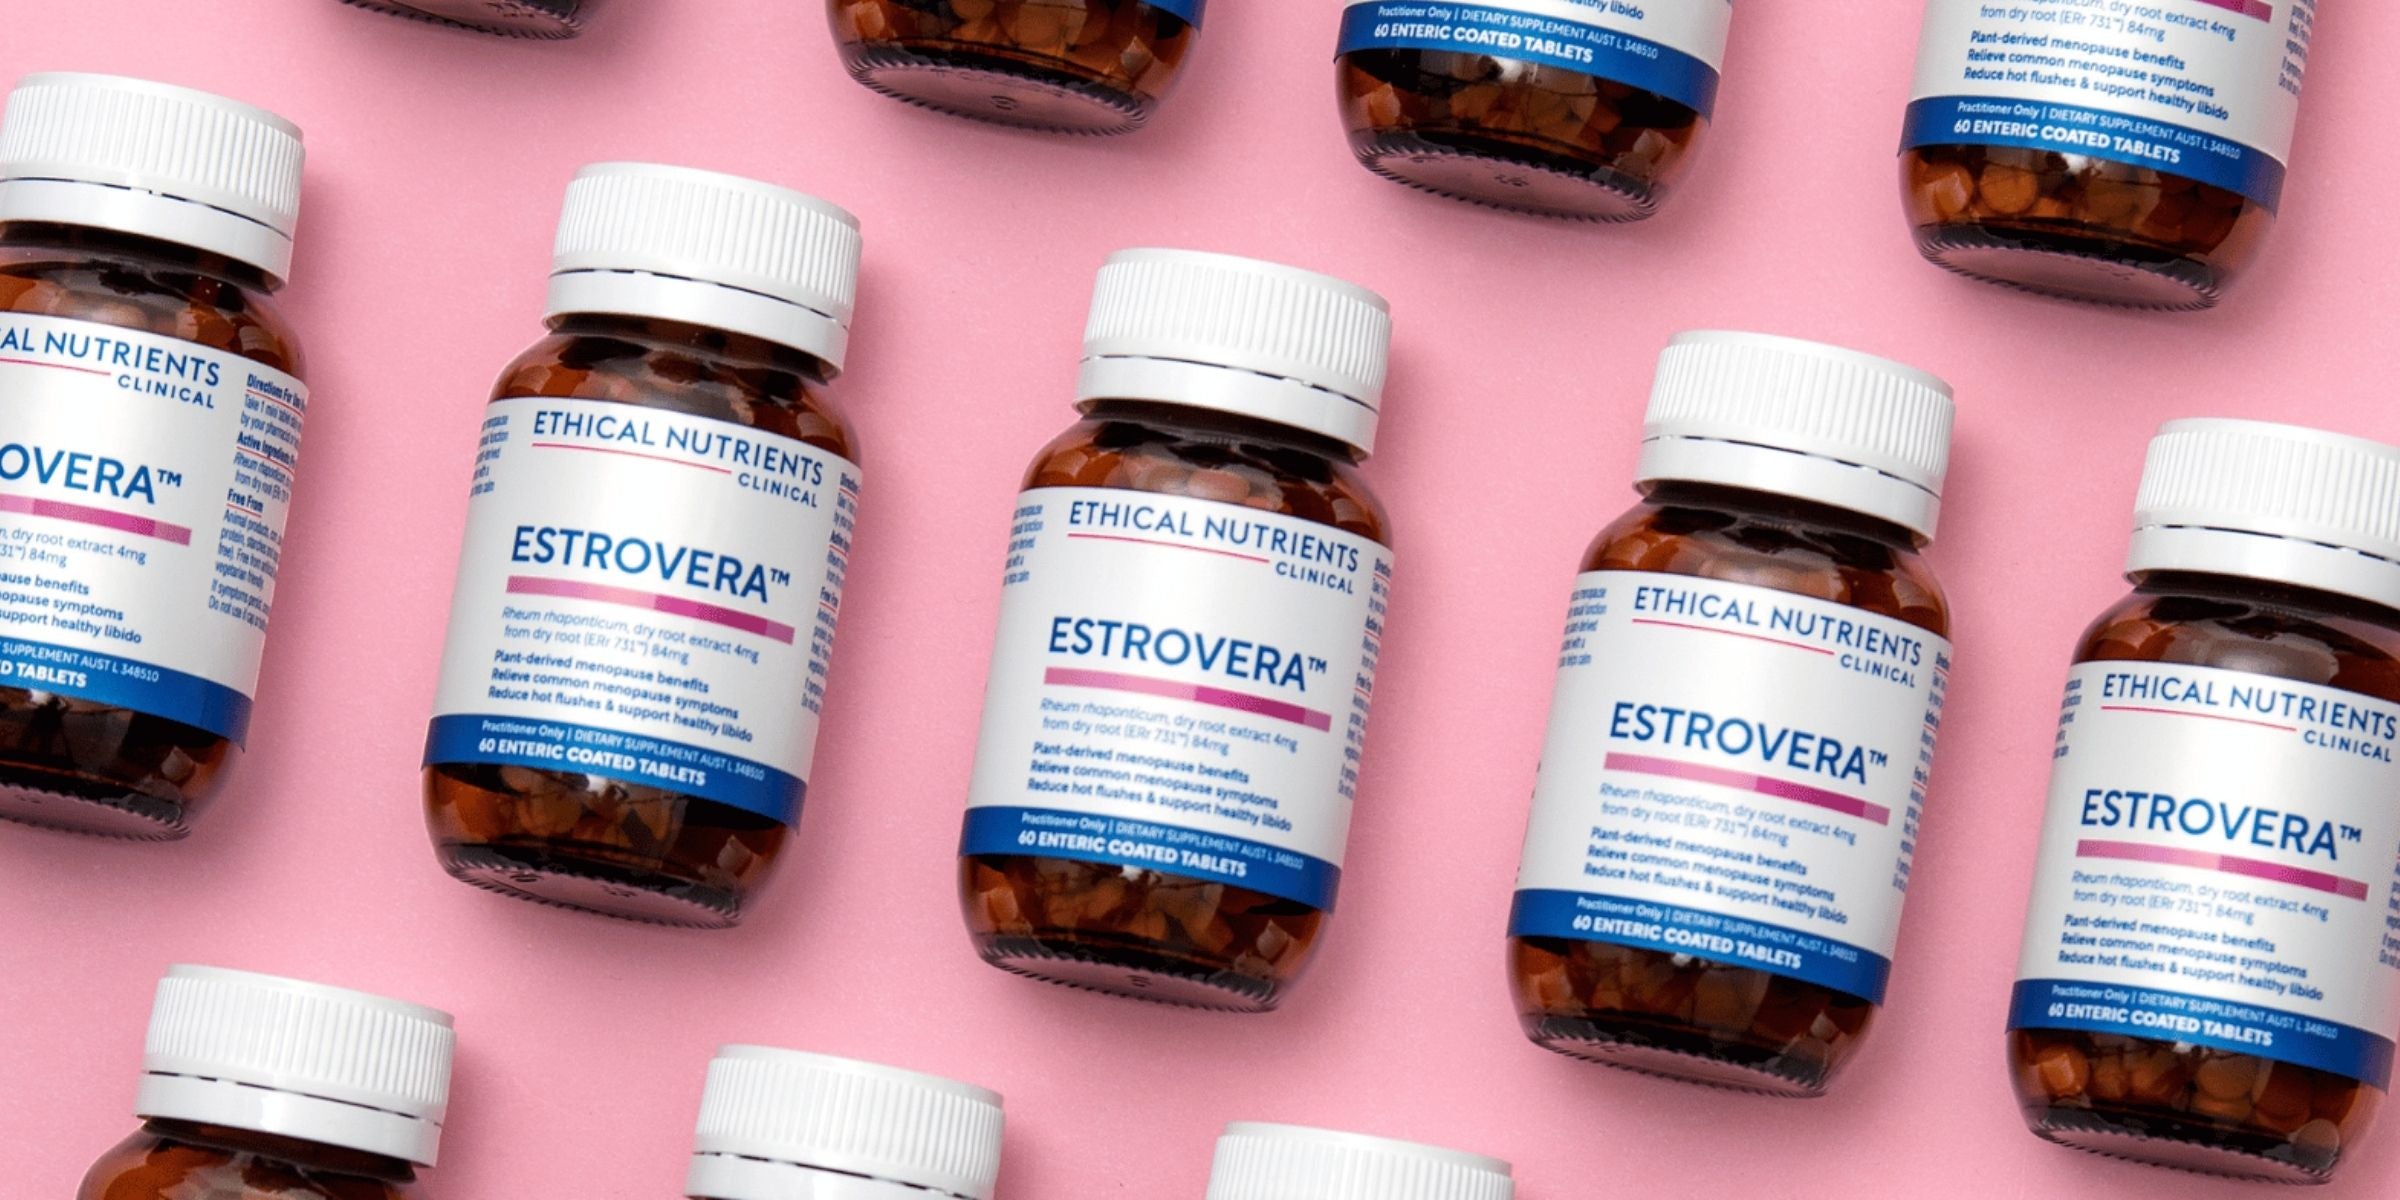 ethical nutrients clinical estrovera bottles lying side by side on a pink table